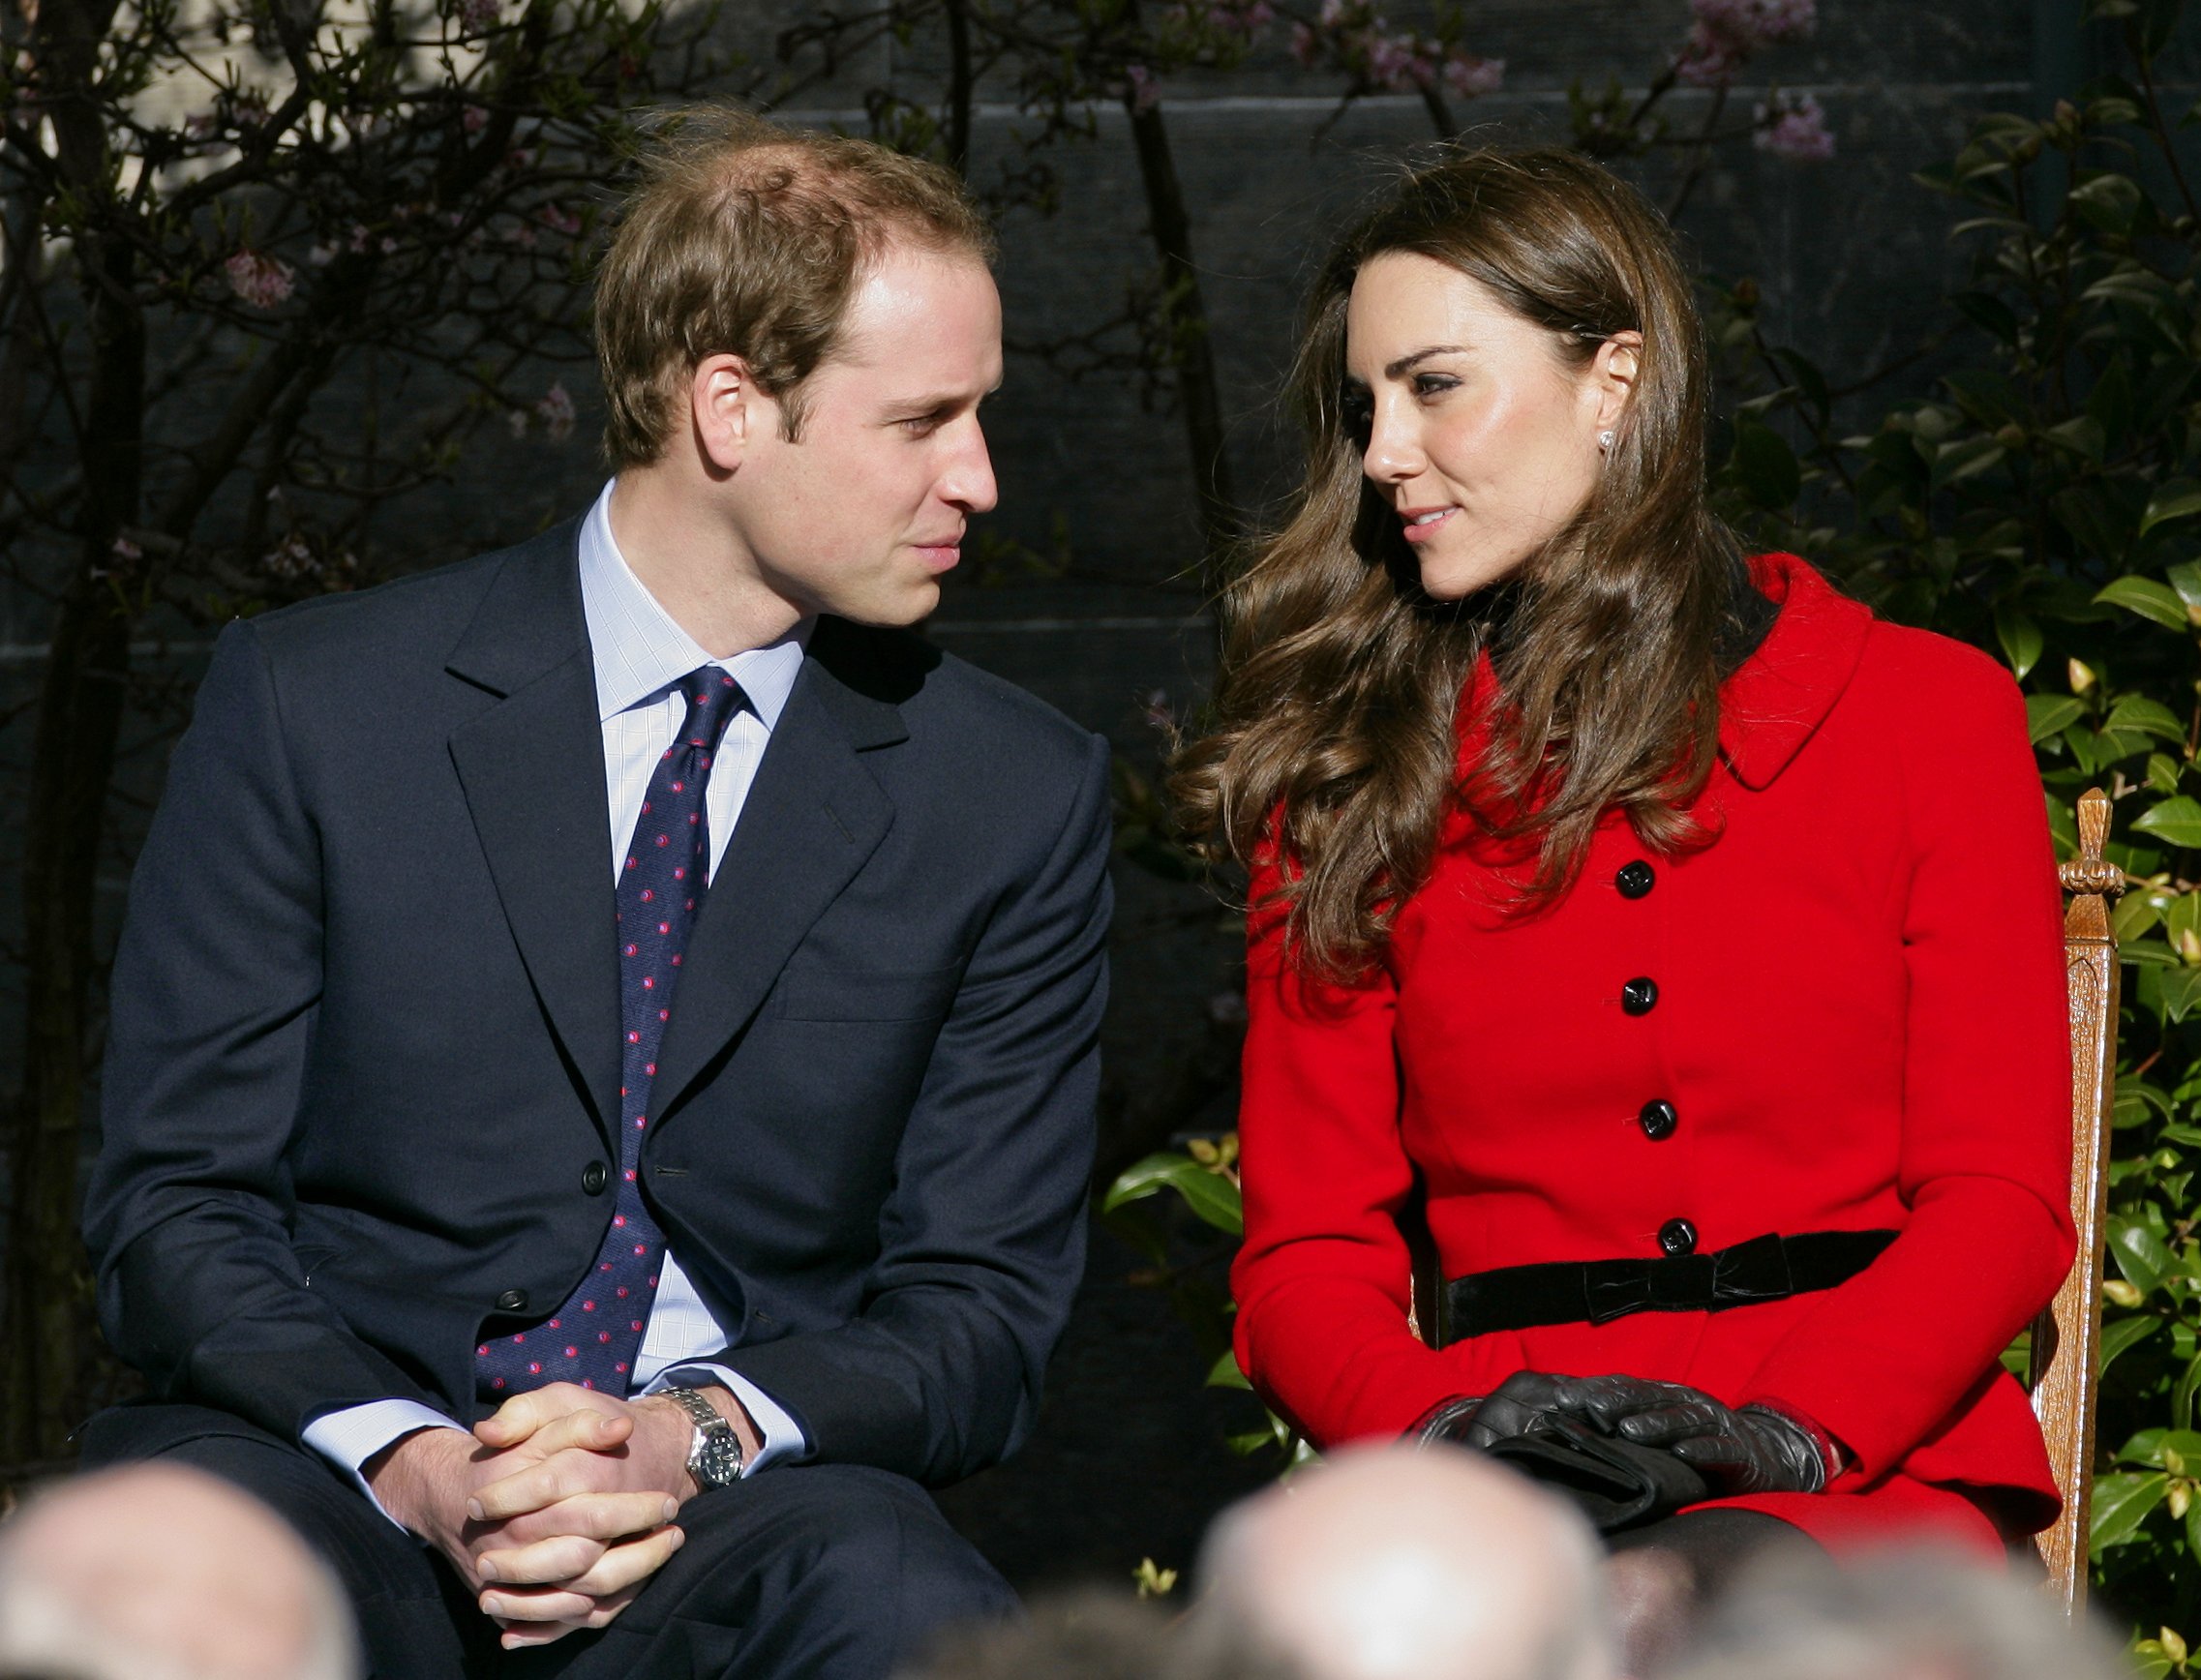 Prince William and Kate Middleton during their visit at the University of St Andrews on February 25, 2011 in Glenrothes, Scotland. / Source: Getty Images